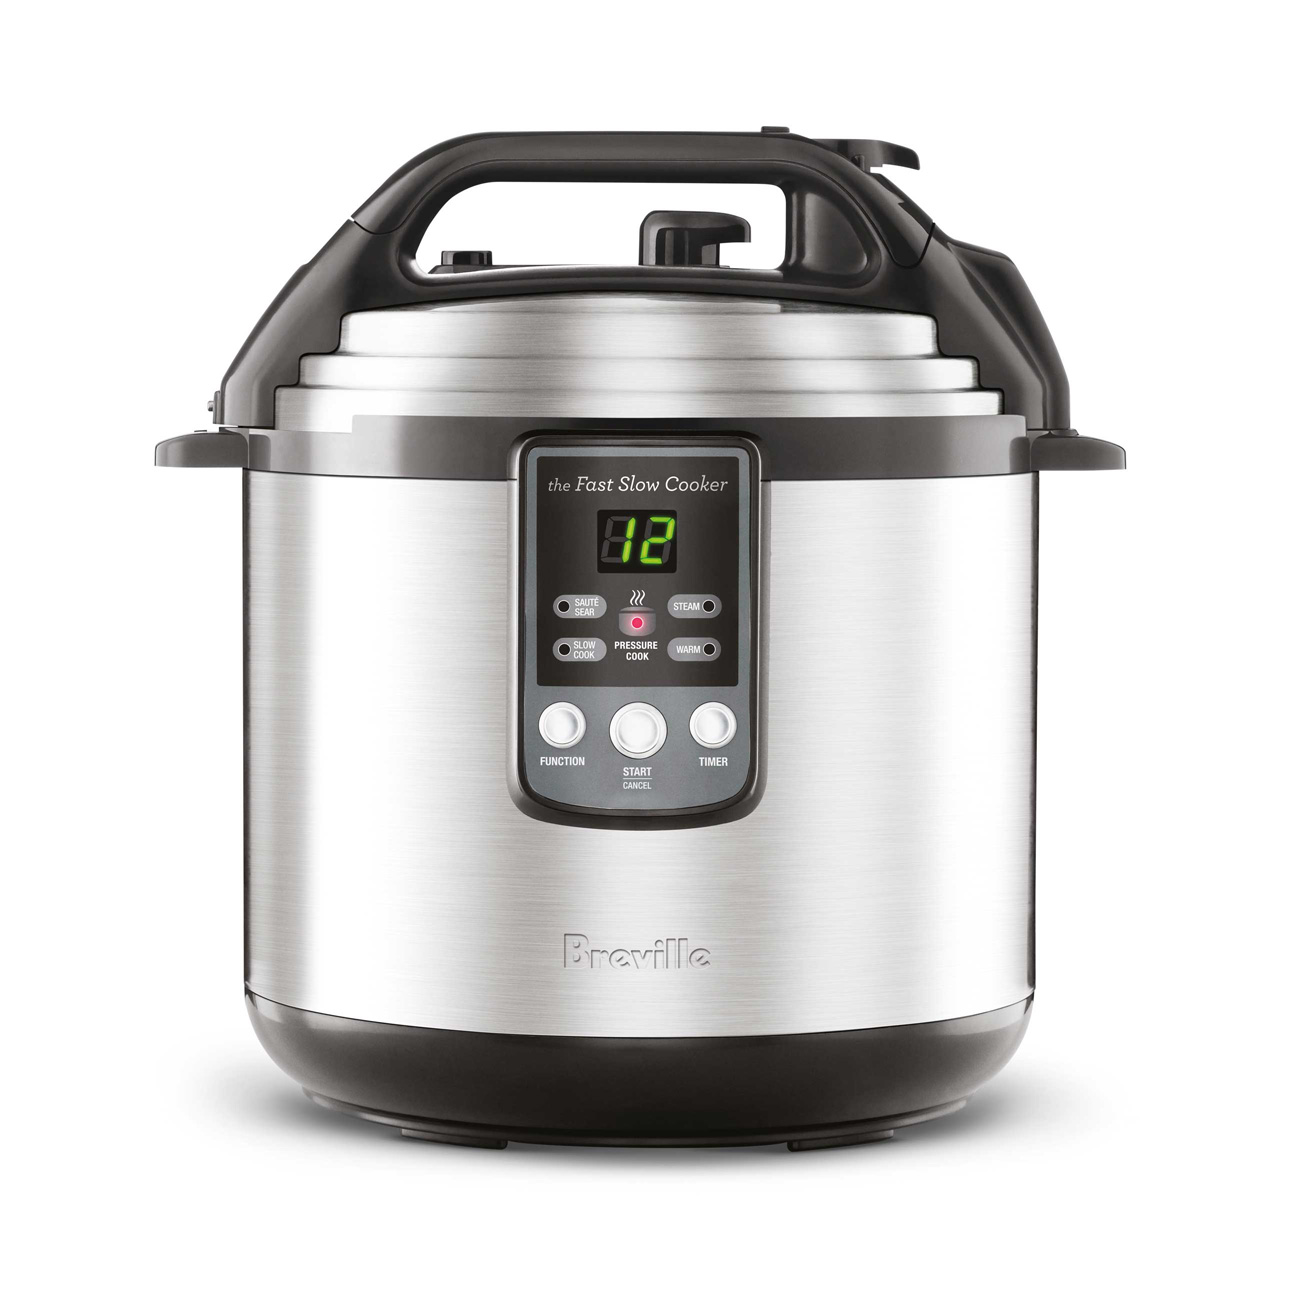 the Fast Slow Cooker™ Pressure Cooker